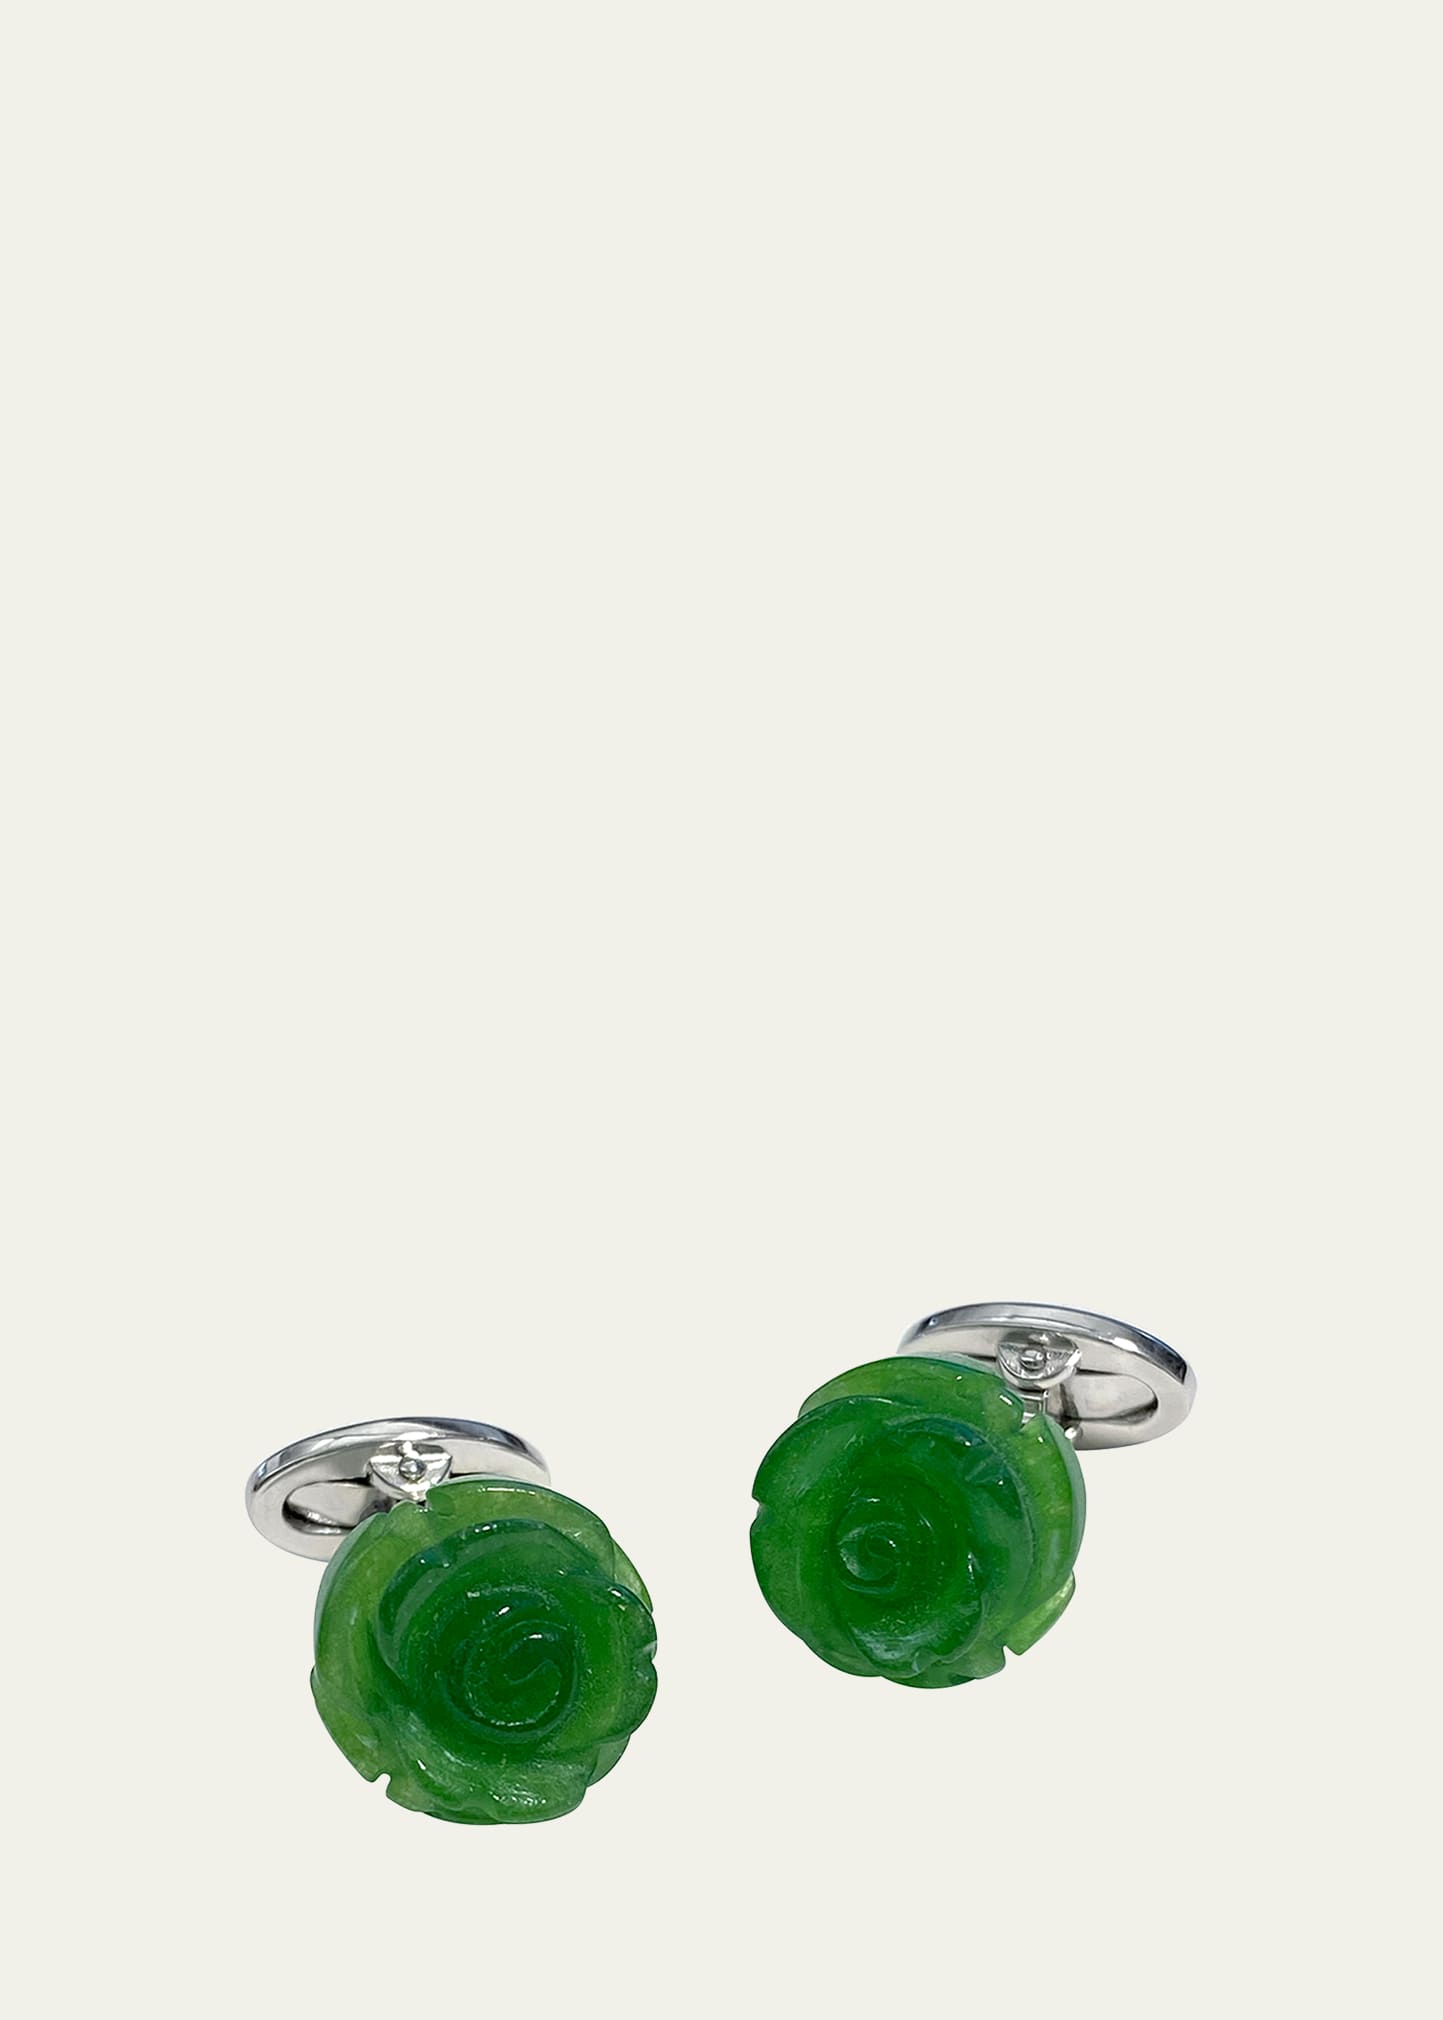 Men's Hand-Carved Green Onyx Sterling Silver Cufflinks